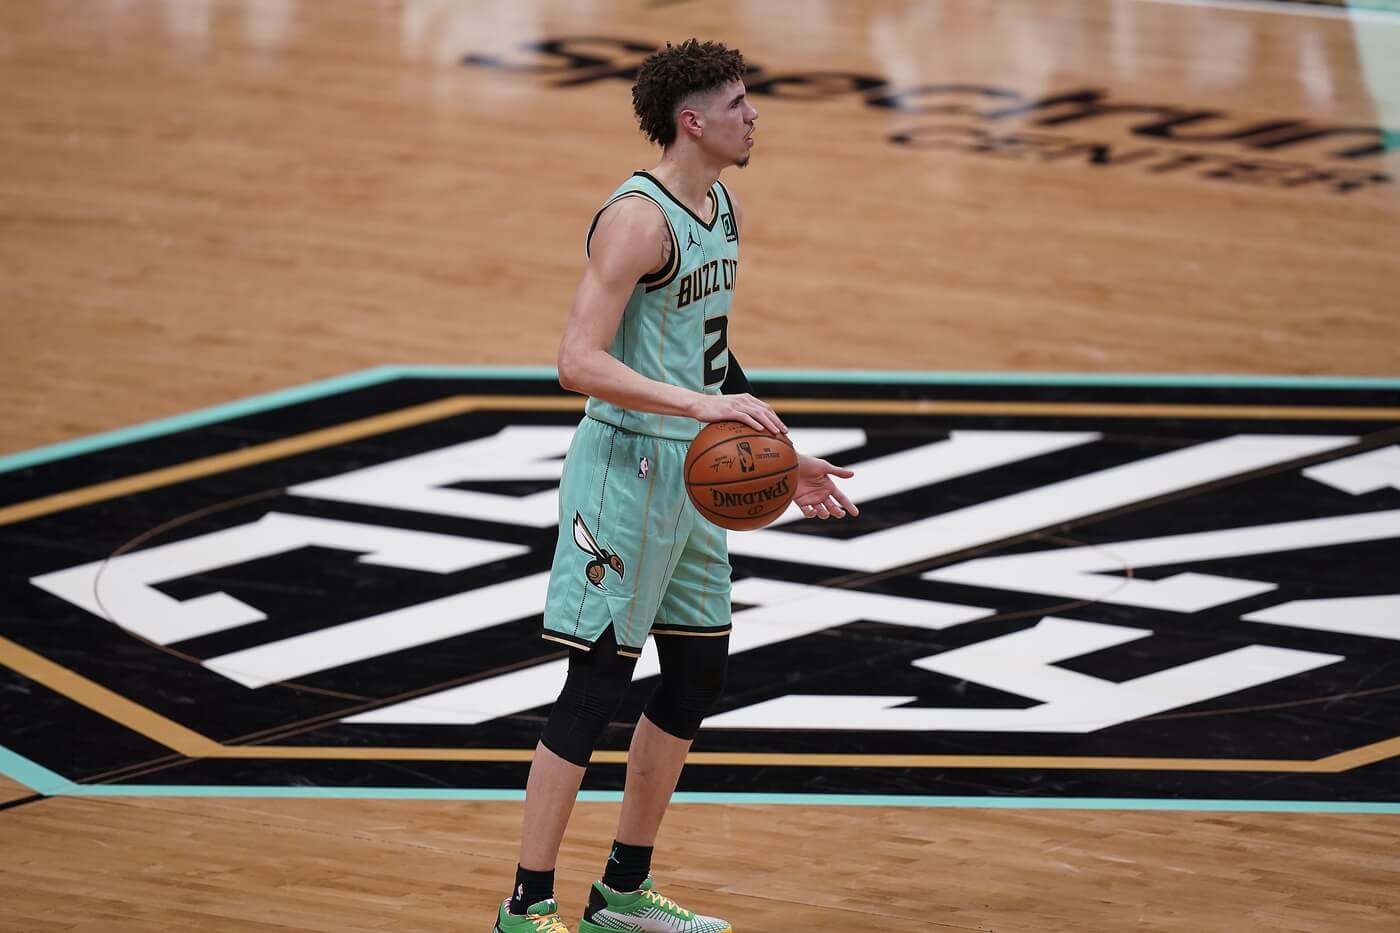 Jan 22, 2021; Charlotte, North Carolina, USA; Charlotte Hornets guard LaMelo Ball (2) brings the ball up court against the Chicago Bulls during the second quarter at Spectrum Center. Mandatory Credit: Jim Dedmon-USA TODAY Sports